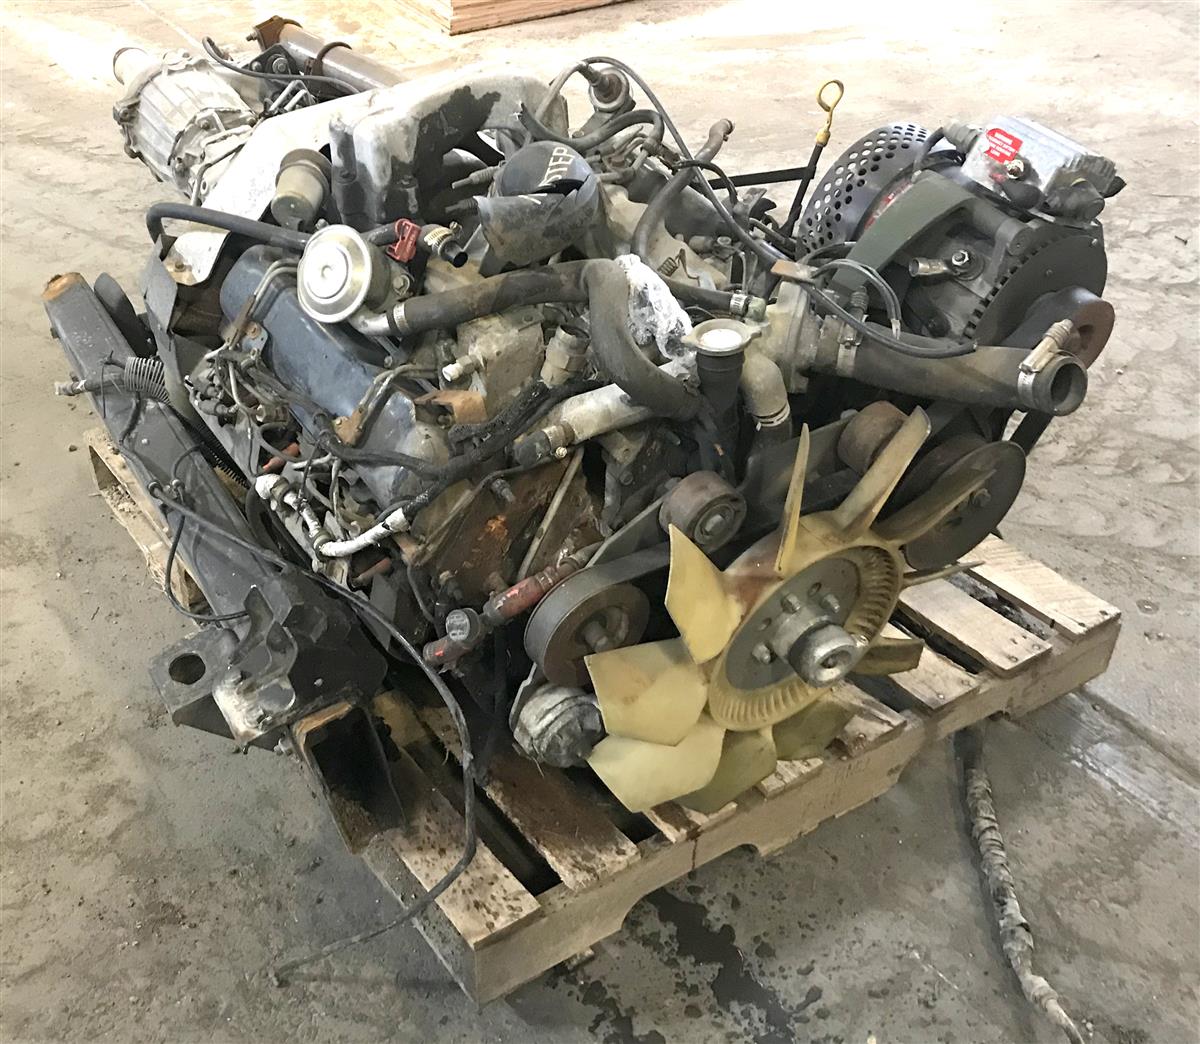 HM-1239 | HM-1239  6.5 Liter Engine with 4 Speed Transmission and Transfer Case (Turbo) (10).JPG